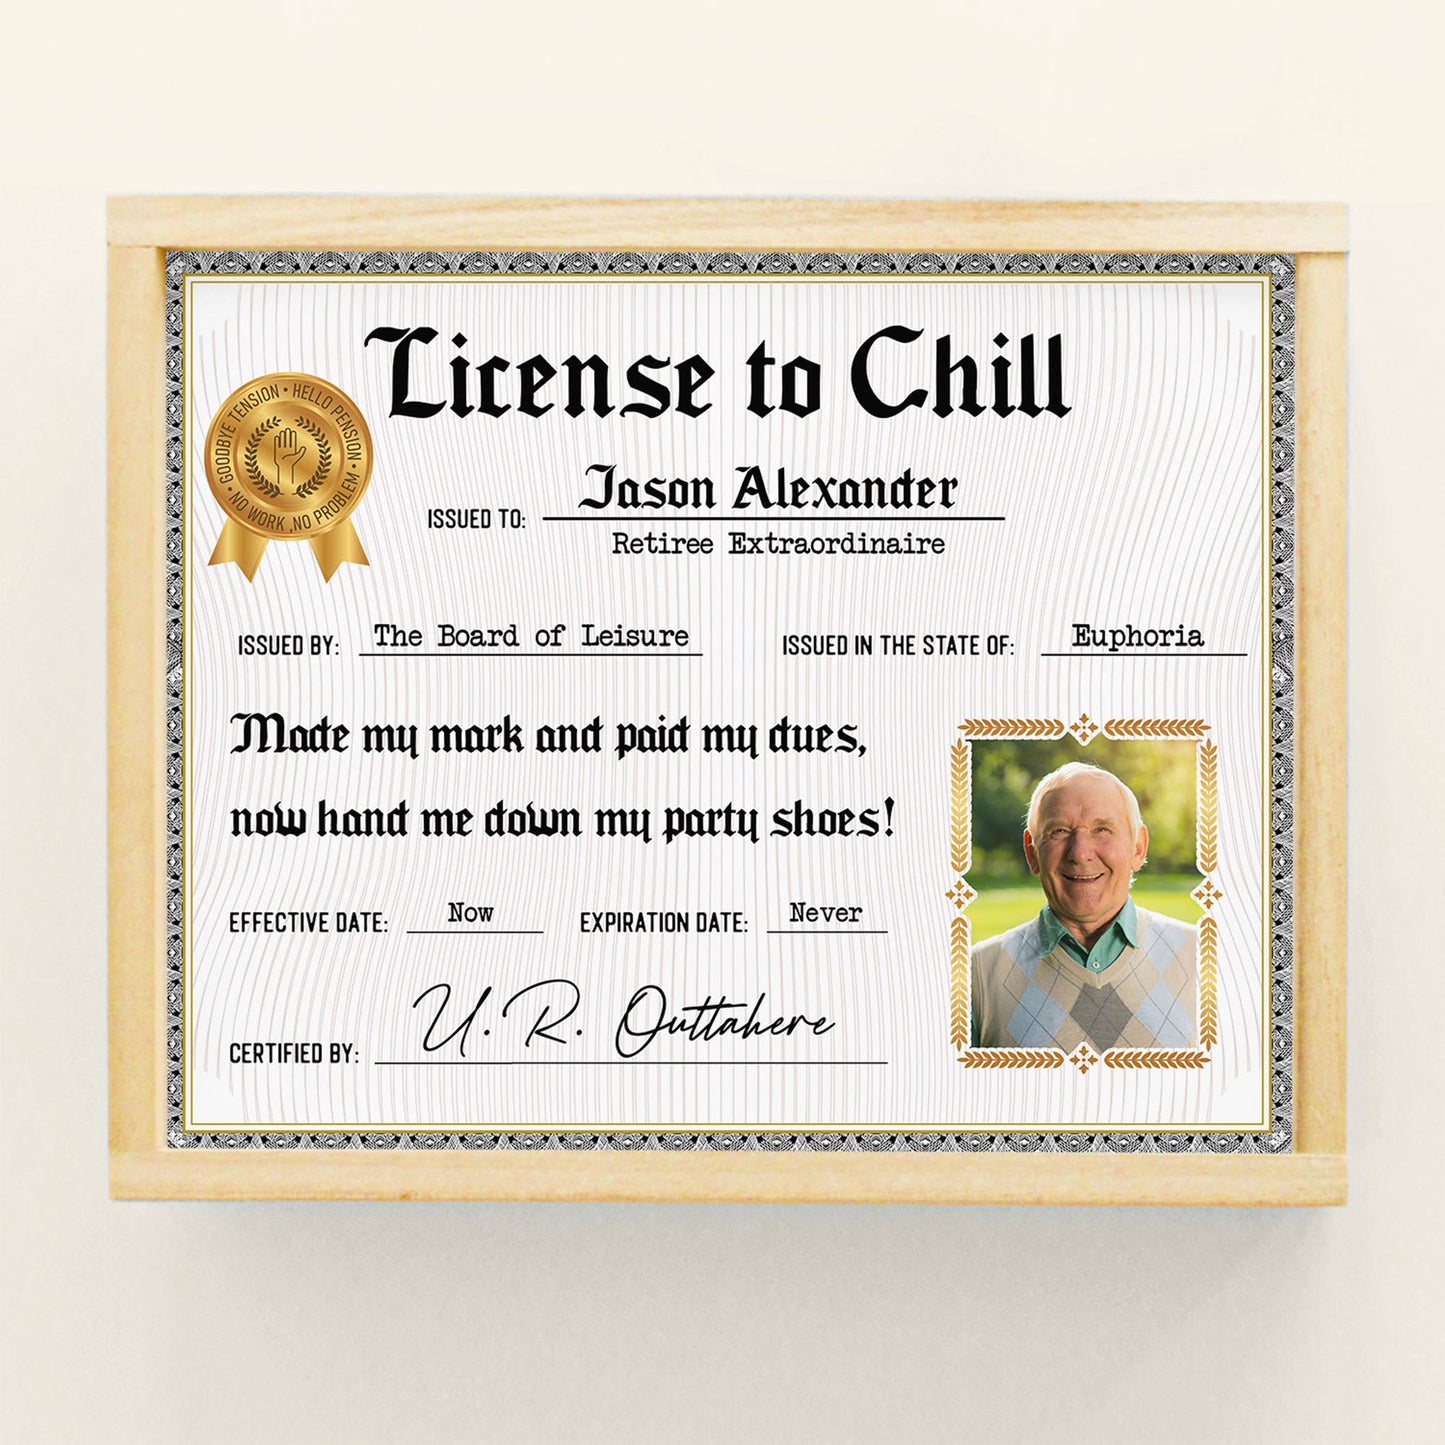 License To Chill - Personalized Poster - Funny, Retirement Gift For Colleagues, Mom, Dad, Grandma, Grandpa